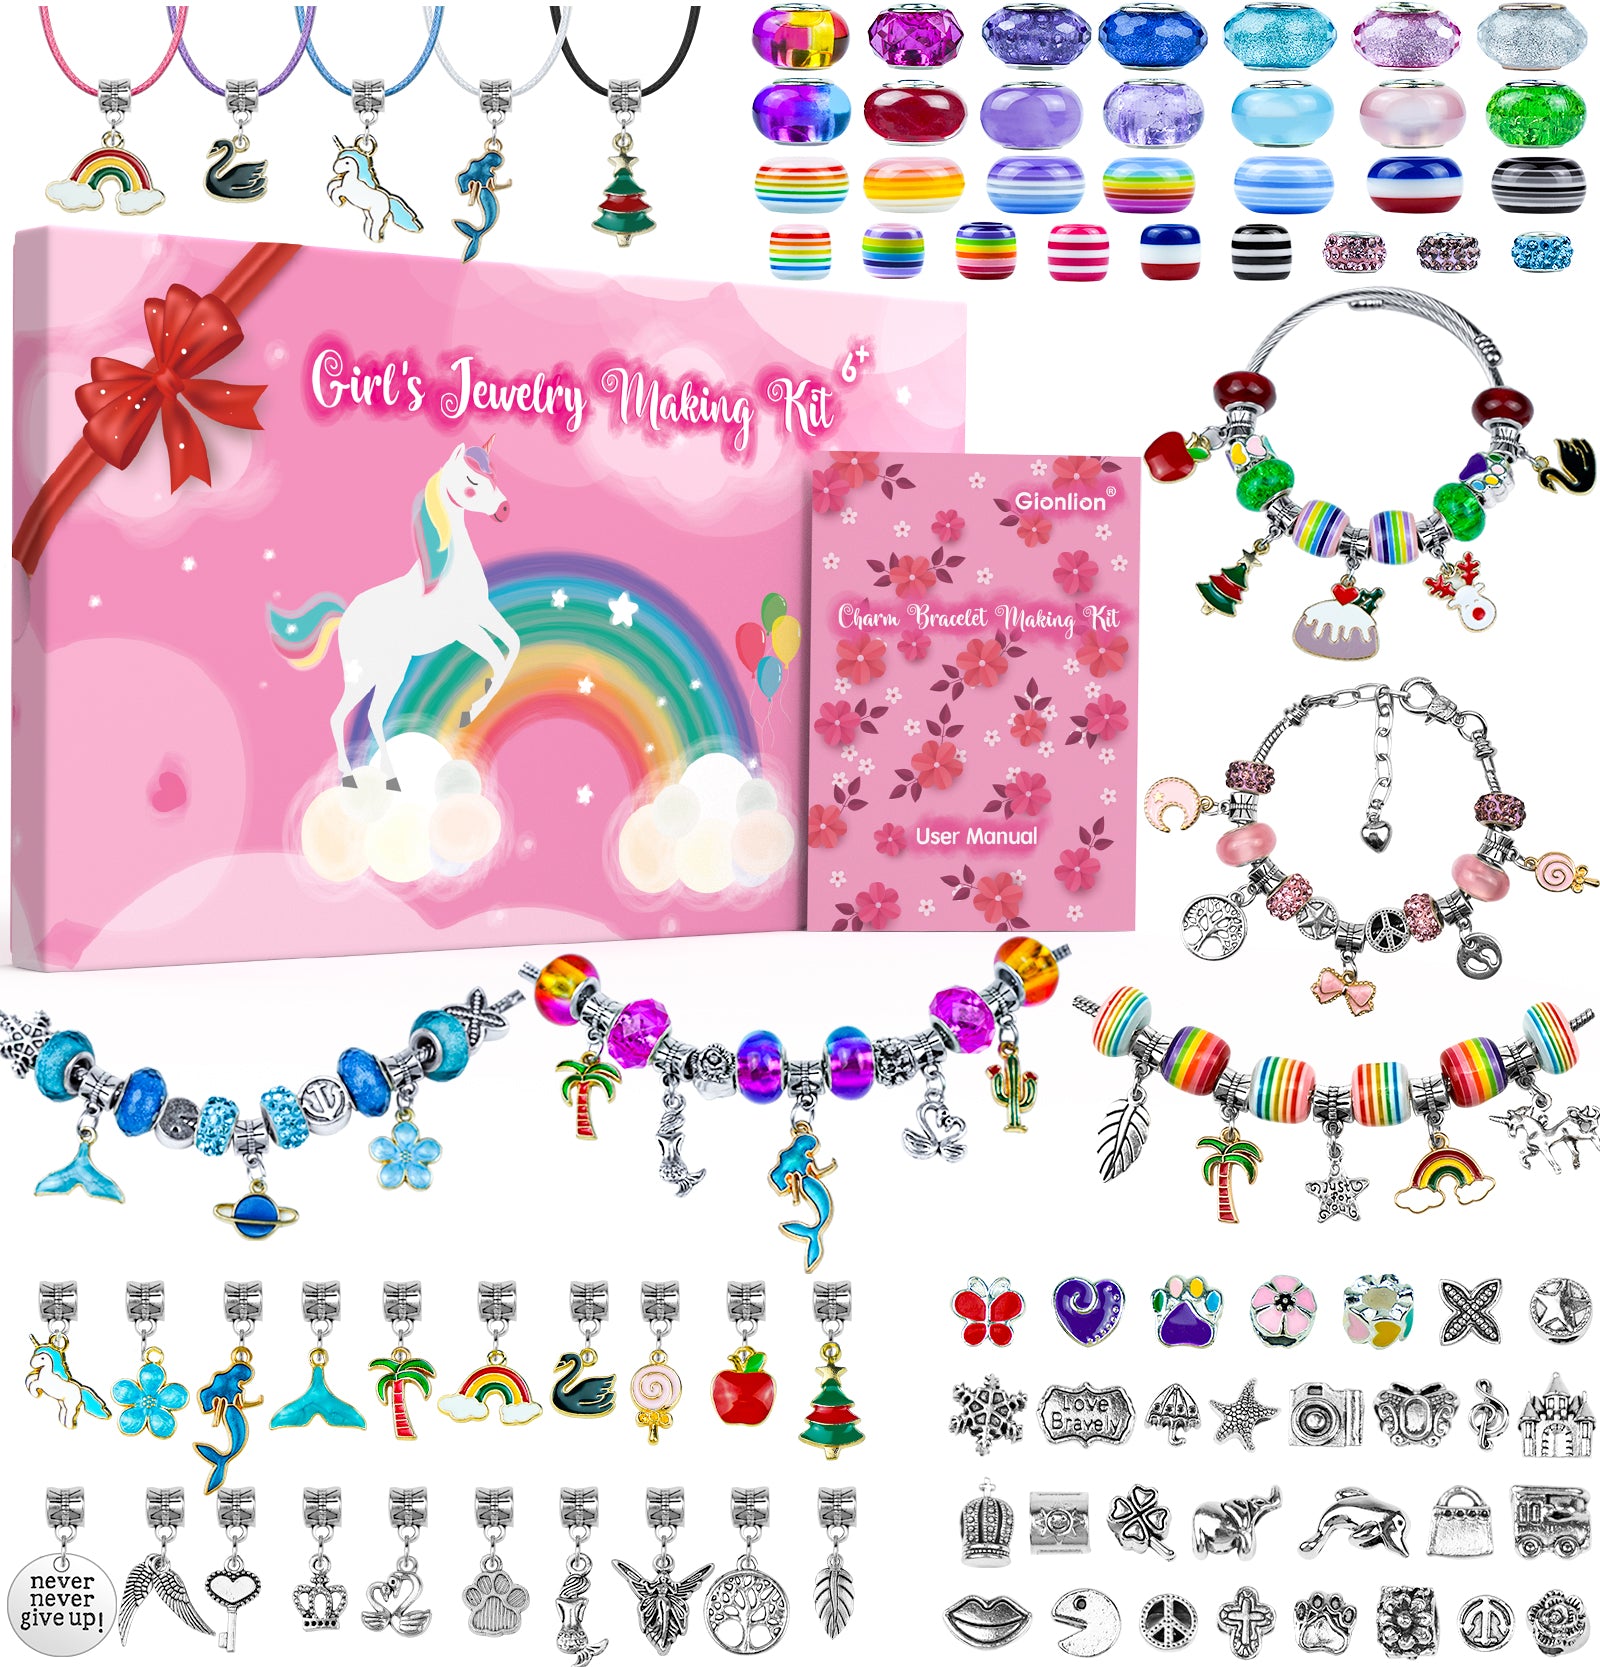 150 Pcs Charm Bracelet Making Kit - Gionlion Jewelry Making Supplies Beads - Unicorn/ Mermaid Crafts Gifts with Snake Chains - Arts Stuff Gift Set for Girls Teens Kids Age 5 6 7 8 9 10-12 Year Old